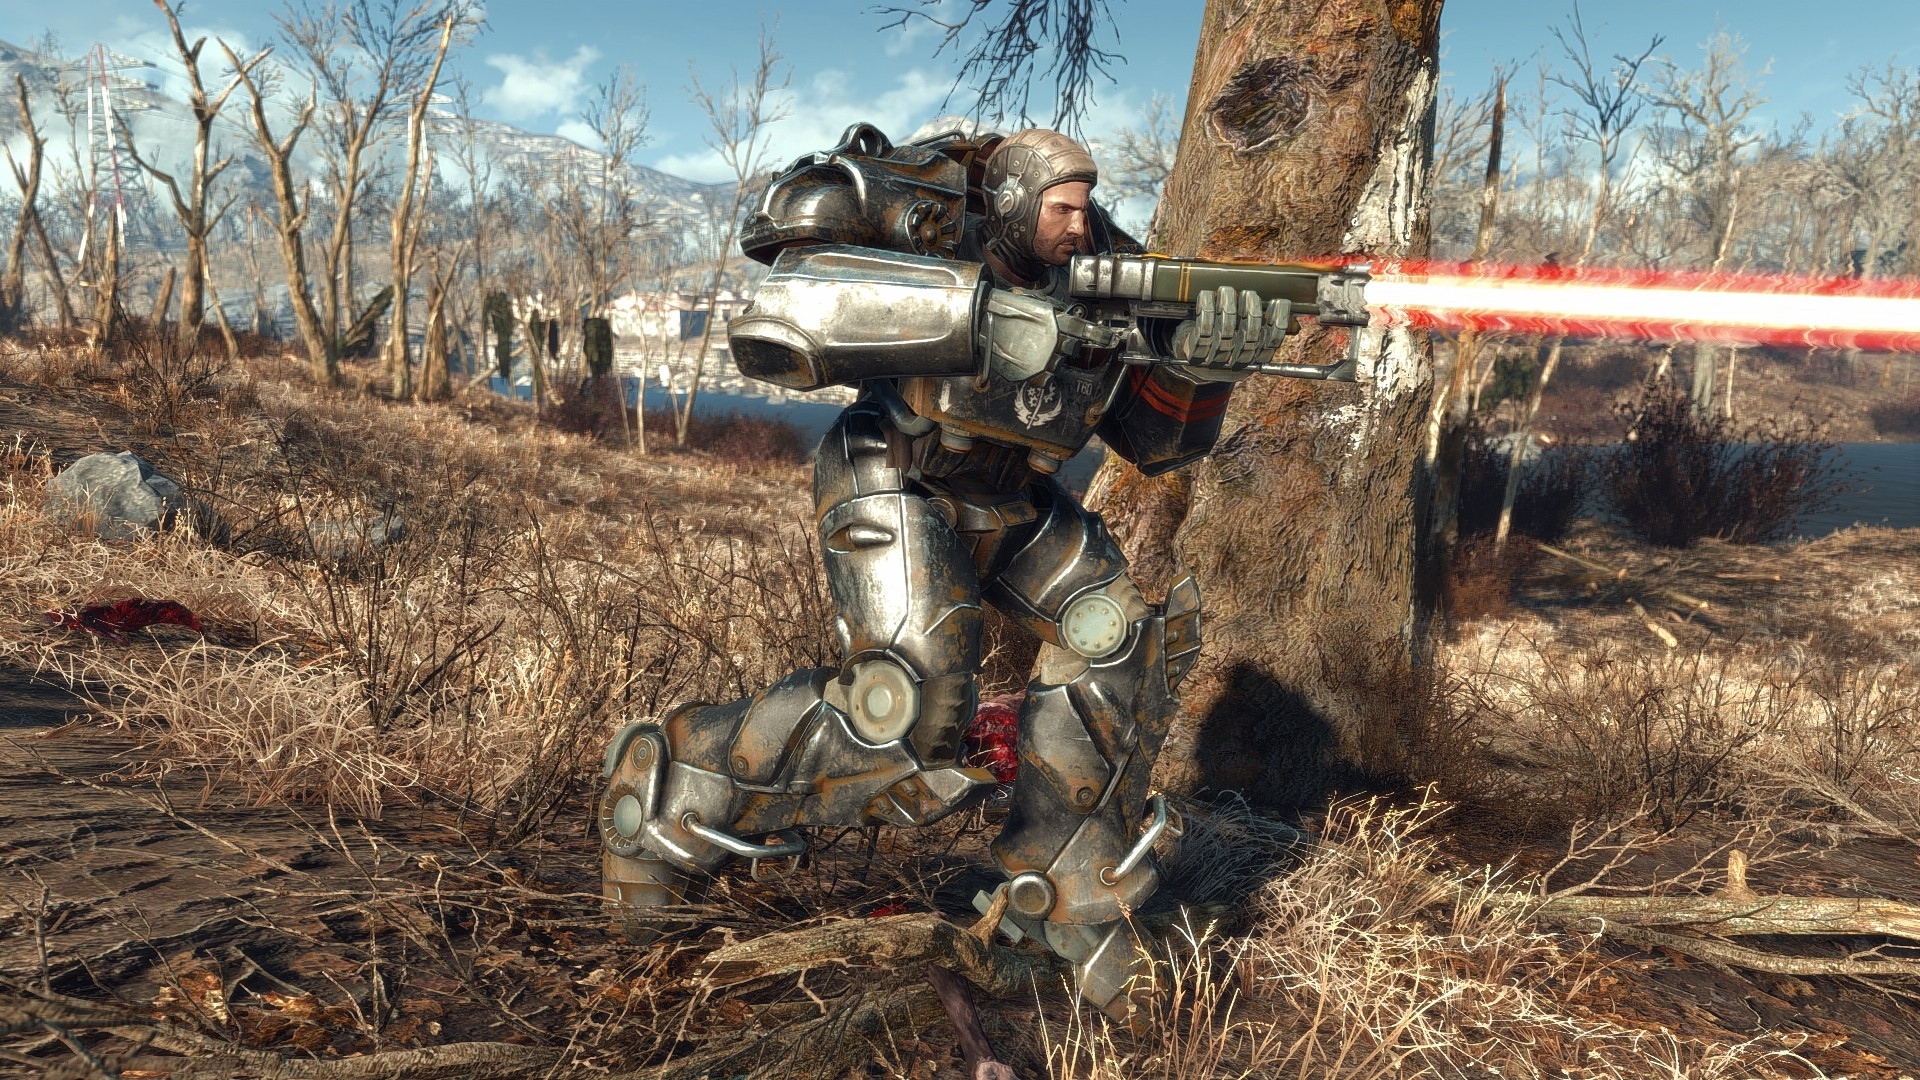 Gallery Of Fallout 4 - Fallout 4 Combat Zone Strip Armour 47 Combat ...